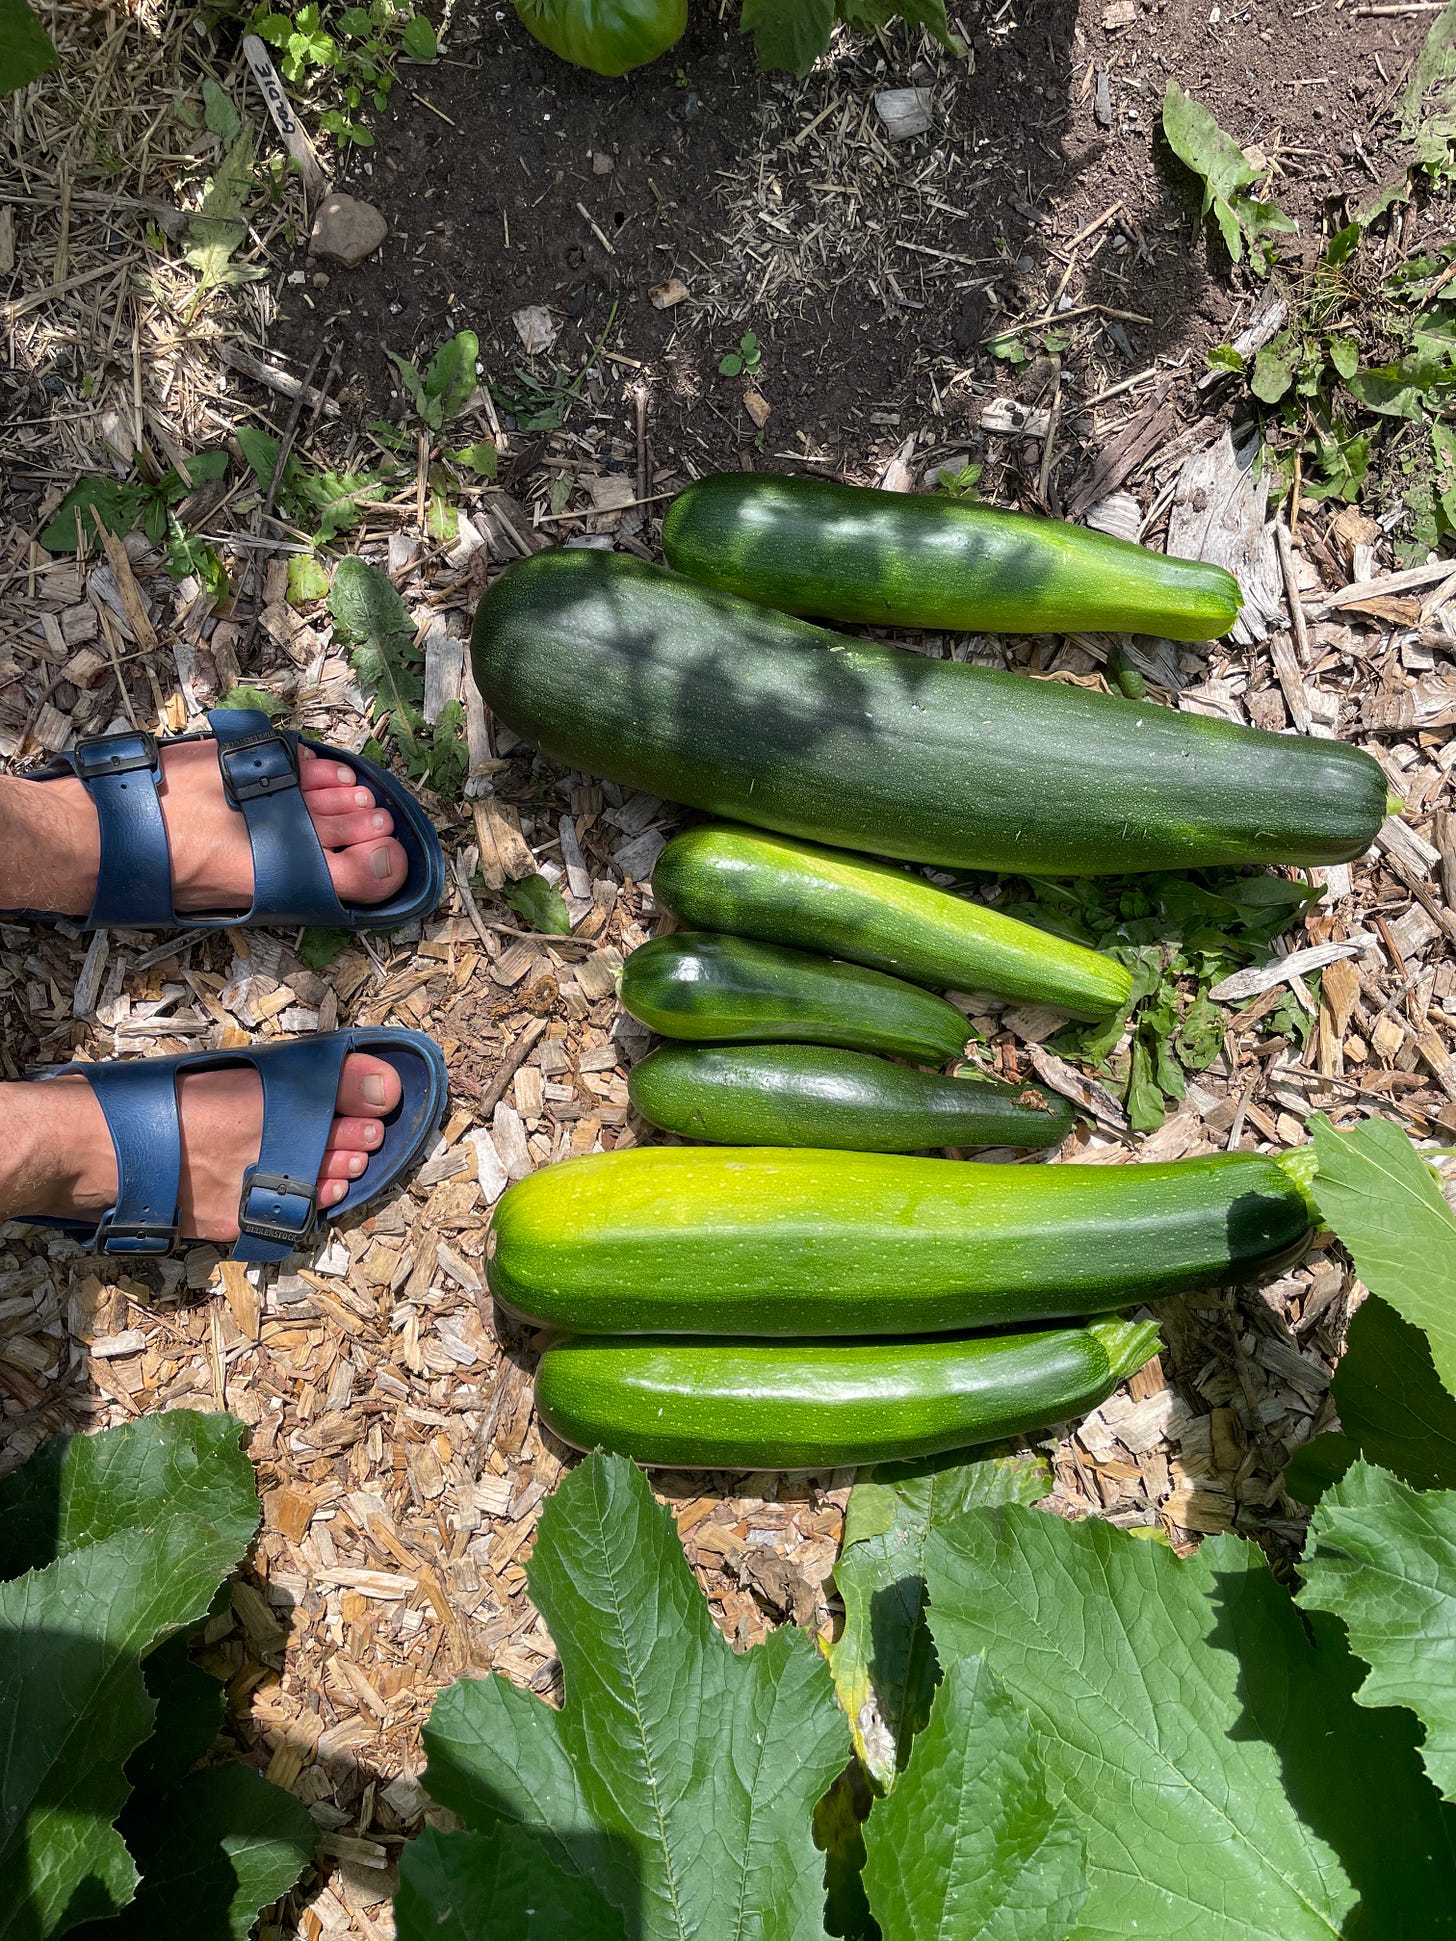 many zucchini on the ground by my sandals